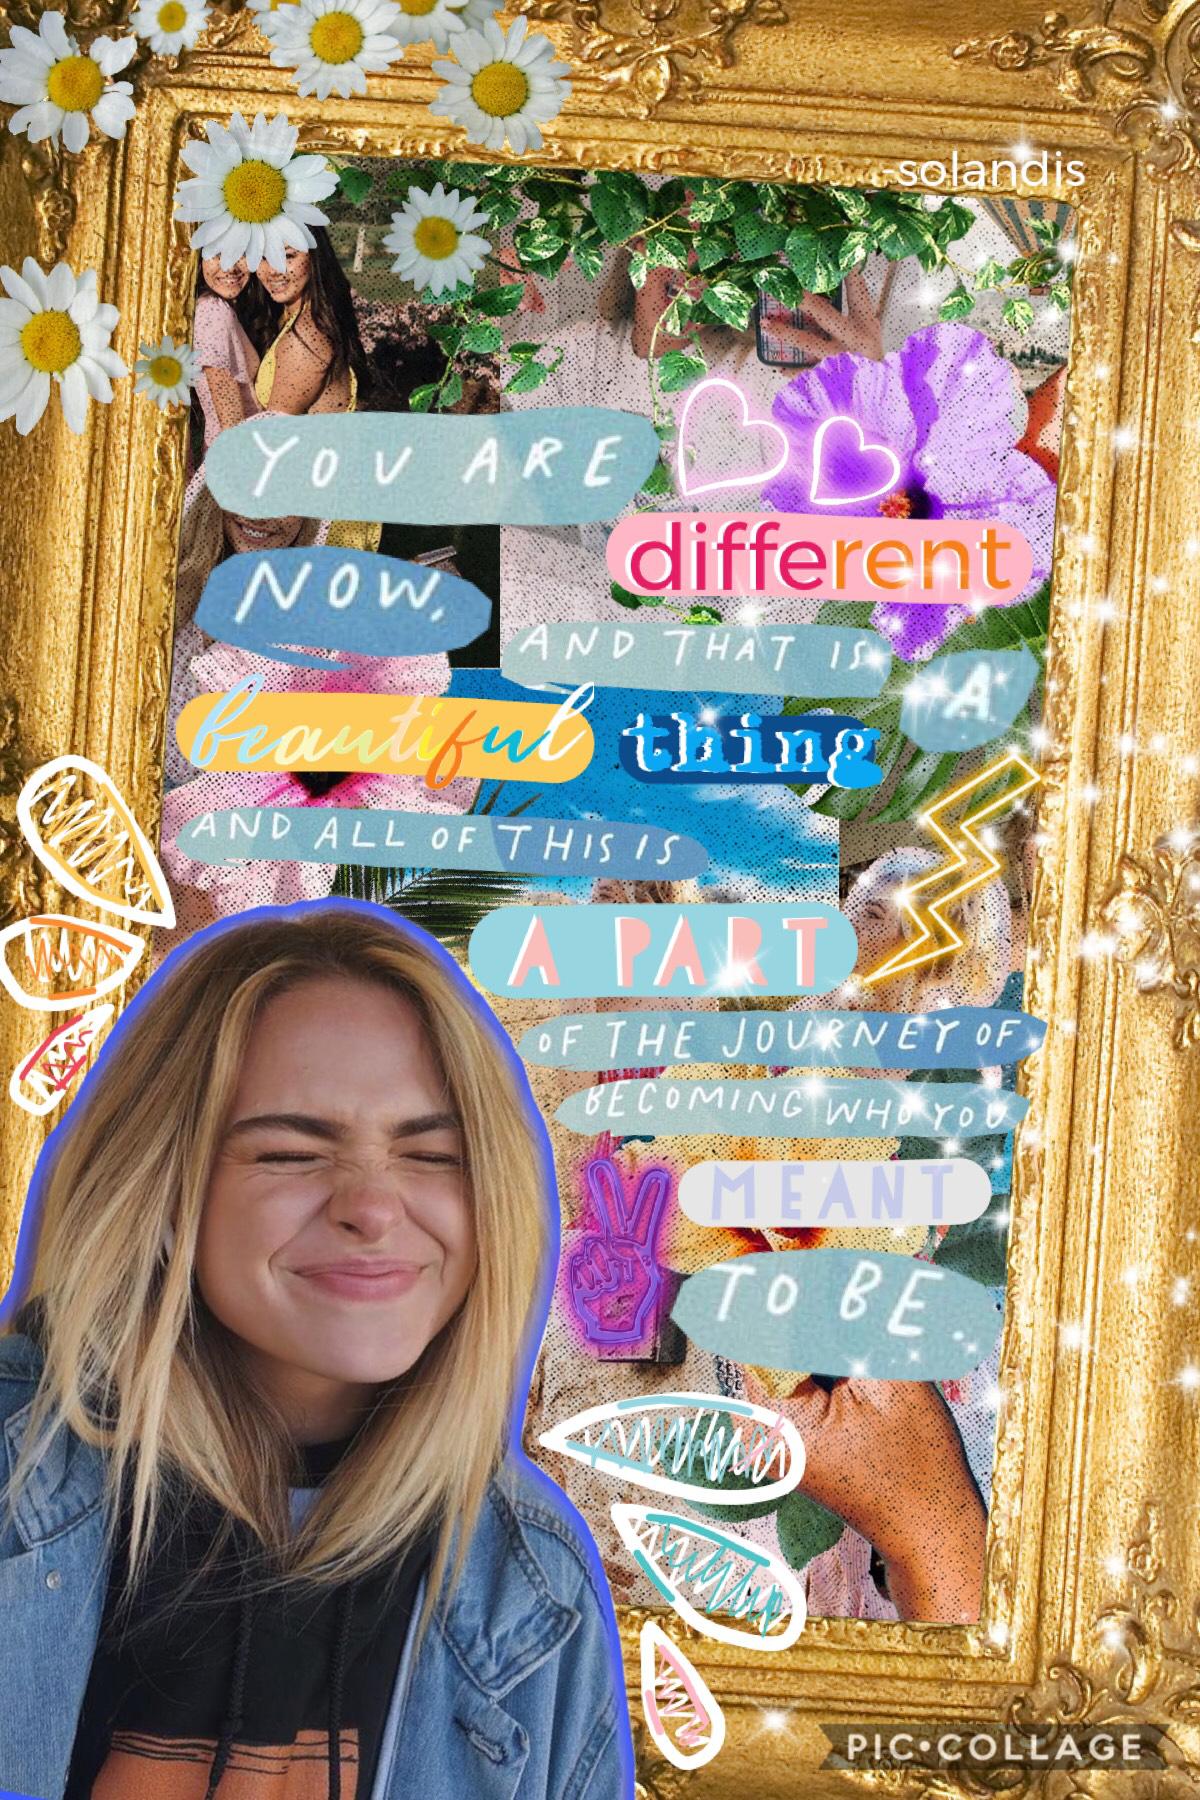 💙🍃⚡️Tappy⚡️🍃💙 4.22.19.

Yay ☀️ I’m officially back from my Lenten Break 🌻 My next few collages my be a lil’ bad because I still need to get my “rhythm” back 😂 I hope you like this one tho 💙 QOTD: 🌻 or 🌷 AOTD: at the moment 🌻